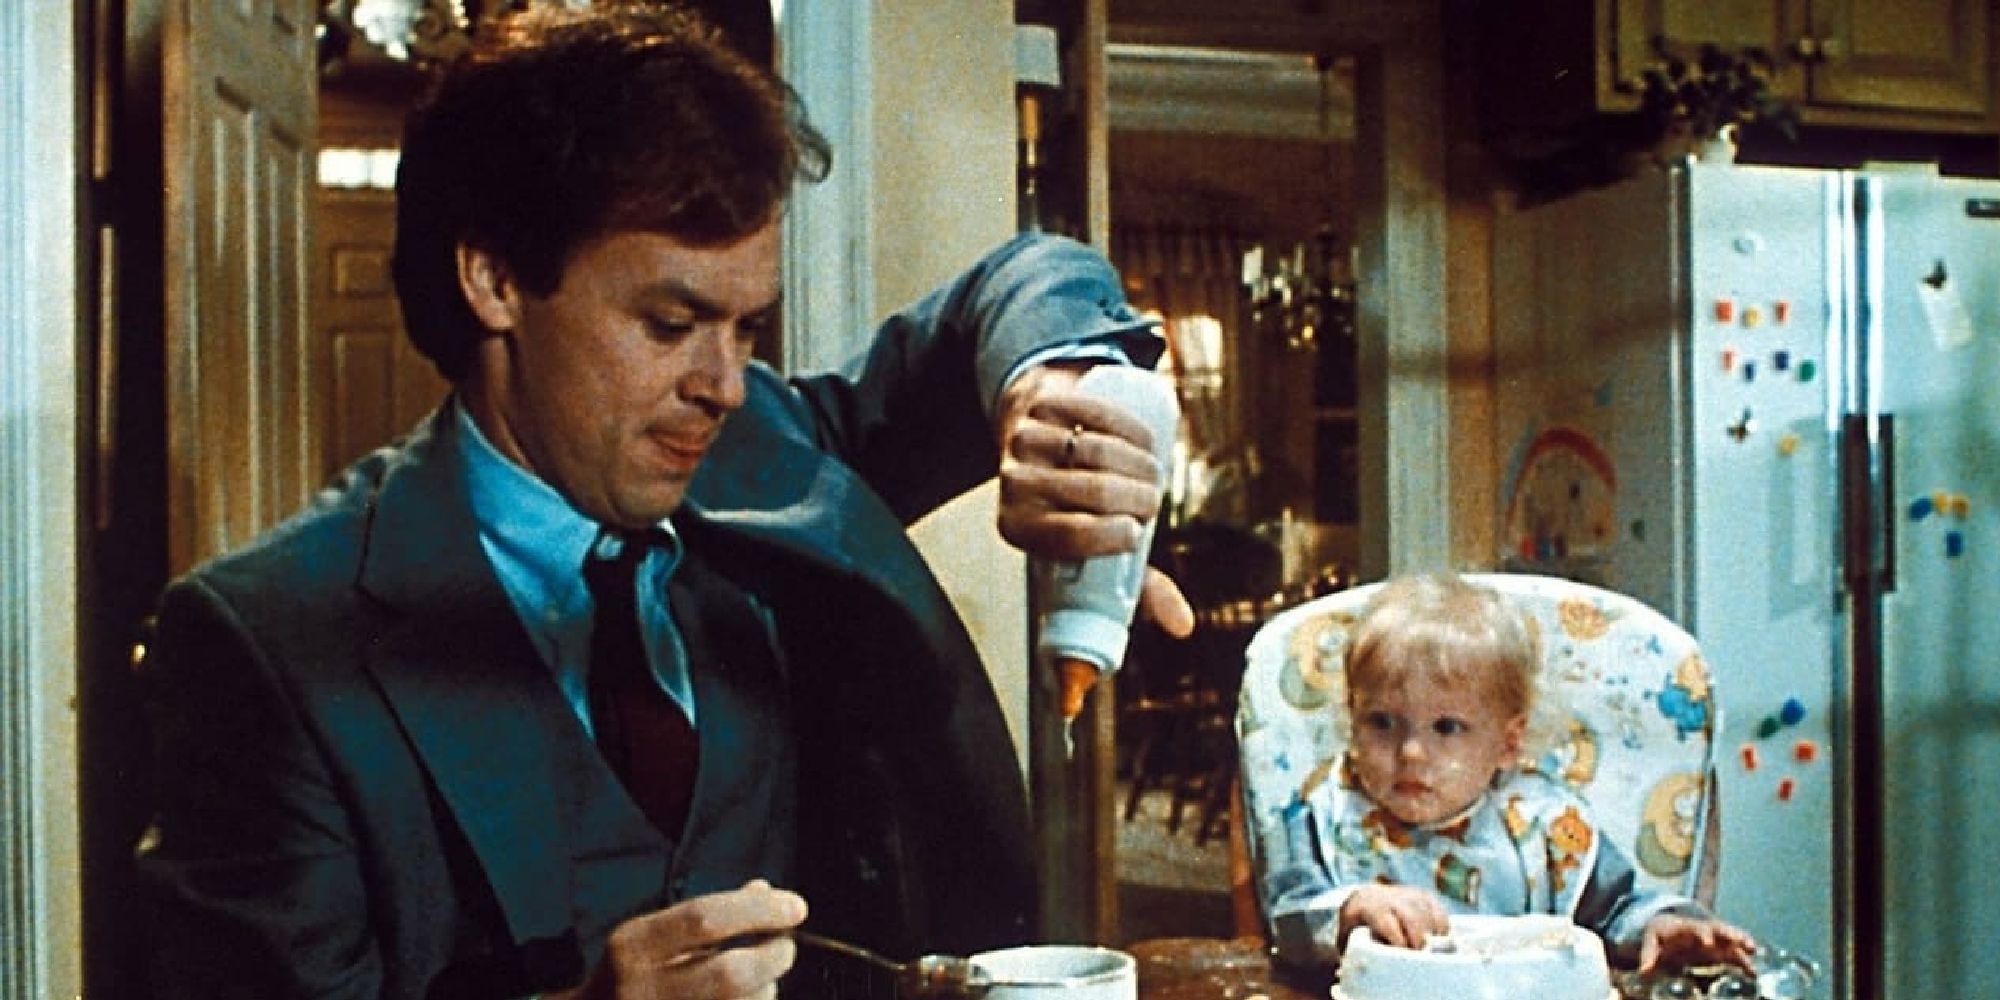 A baby watching Michael Keaton pour baby formula into his coffee in Mr. Mom